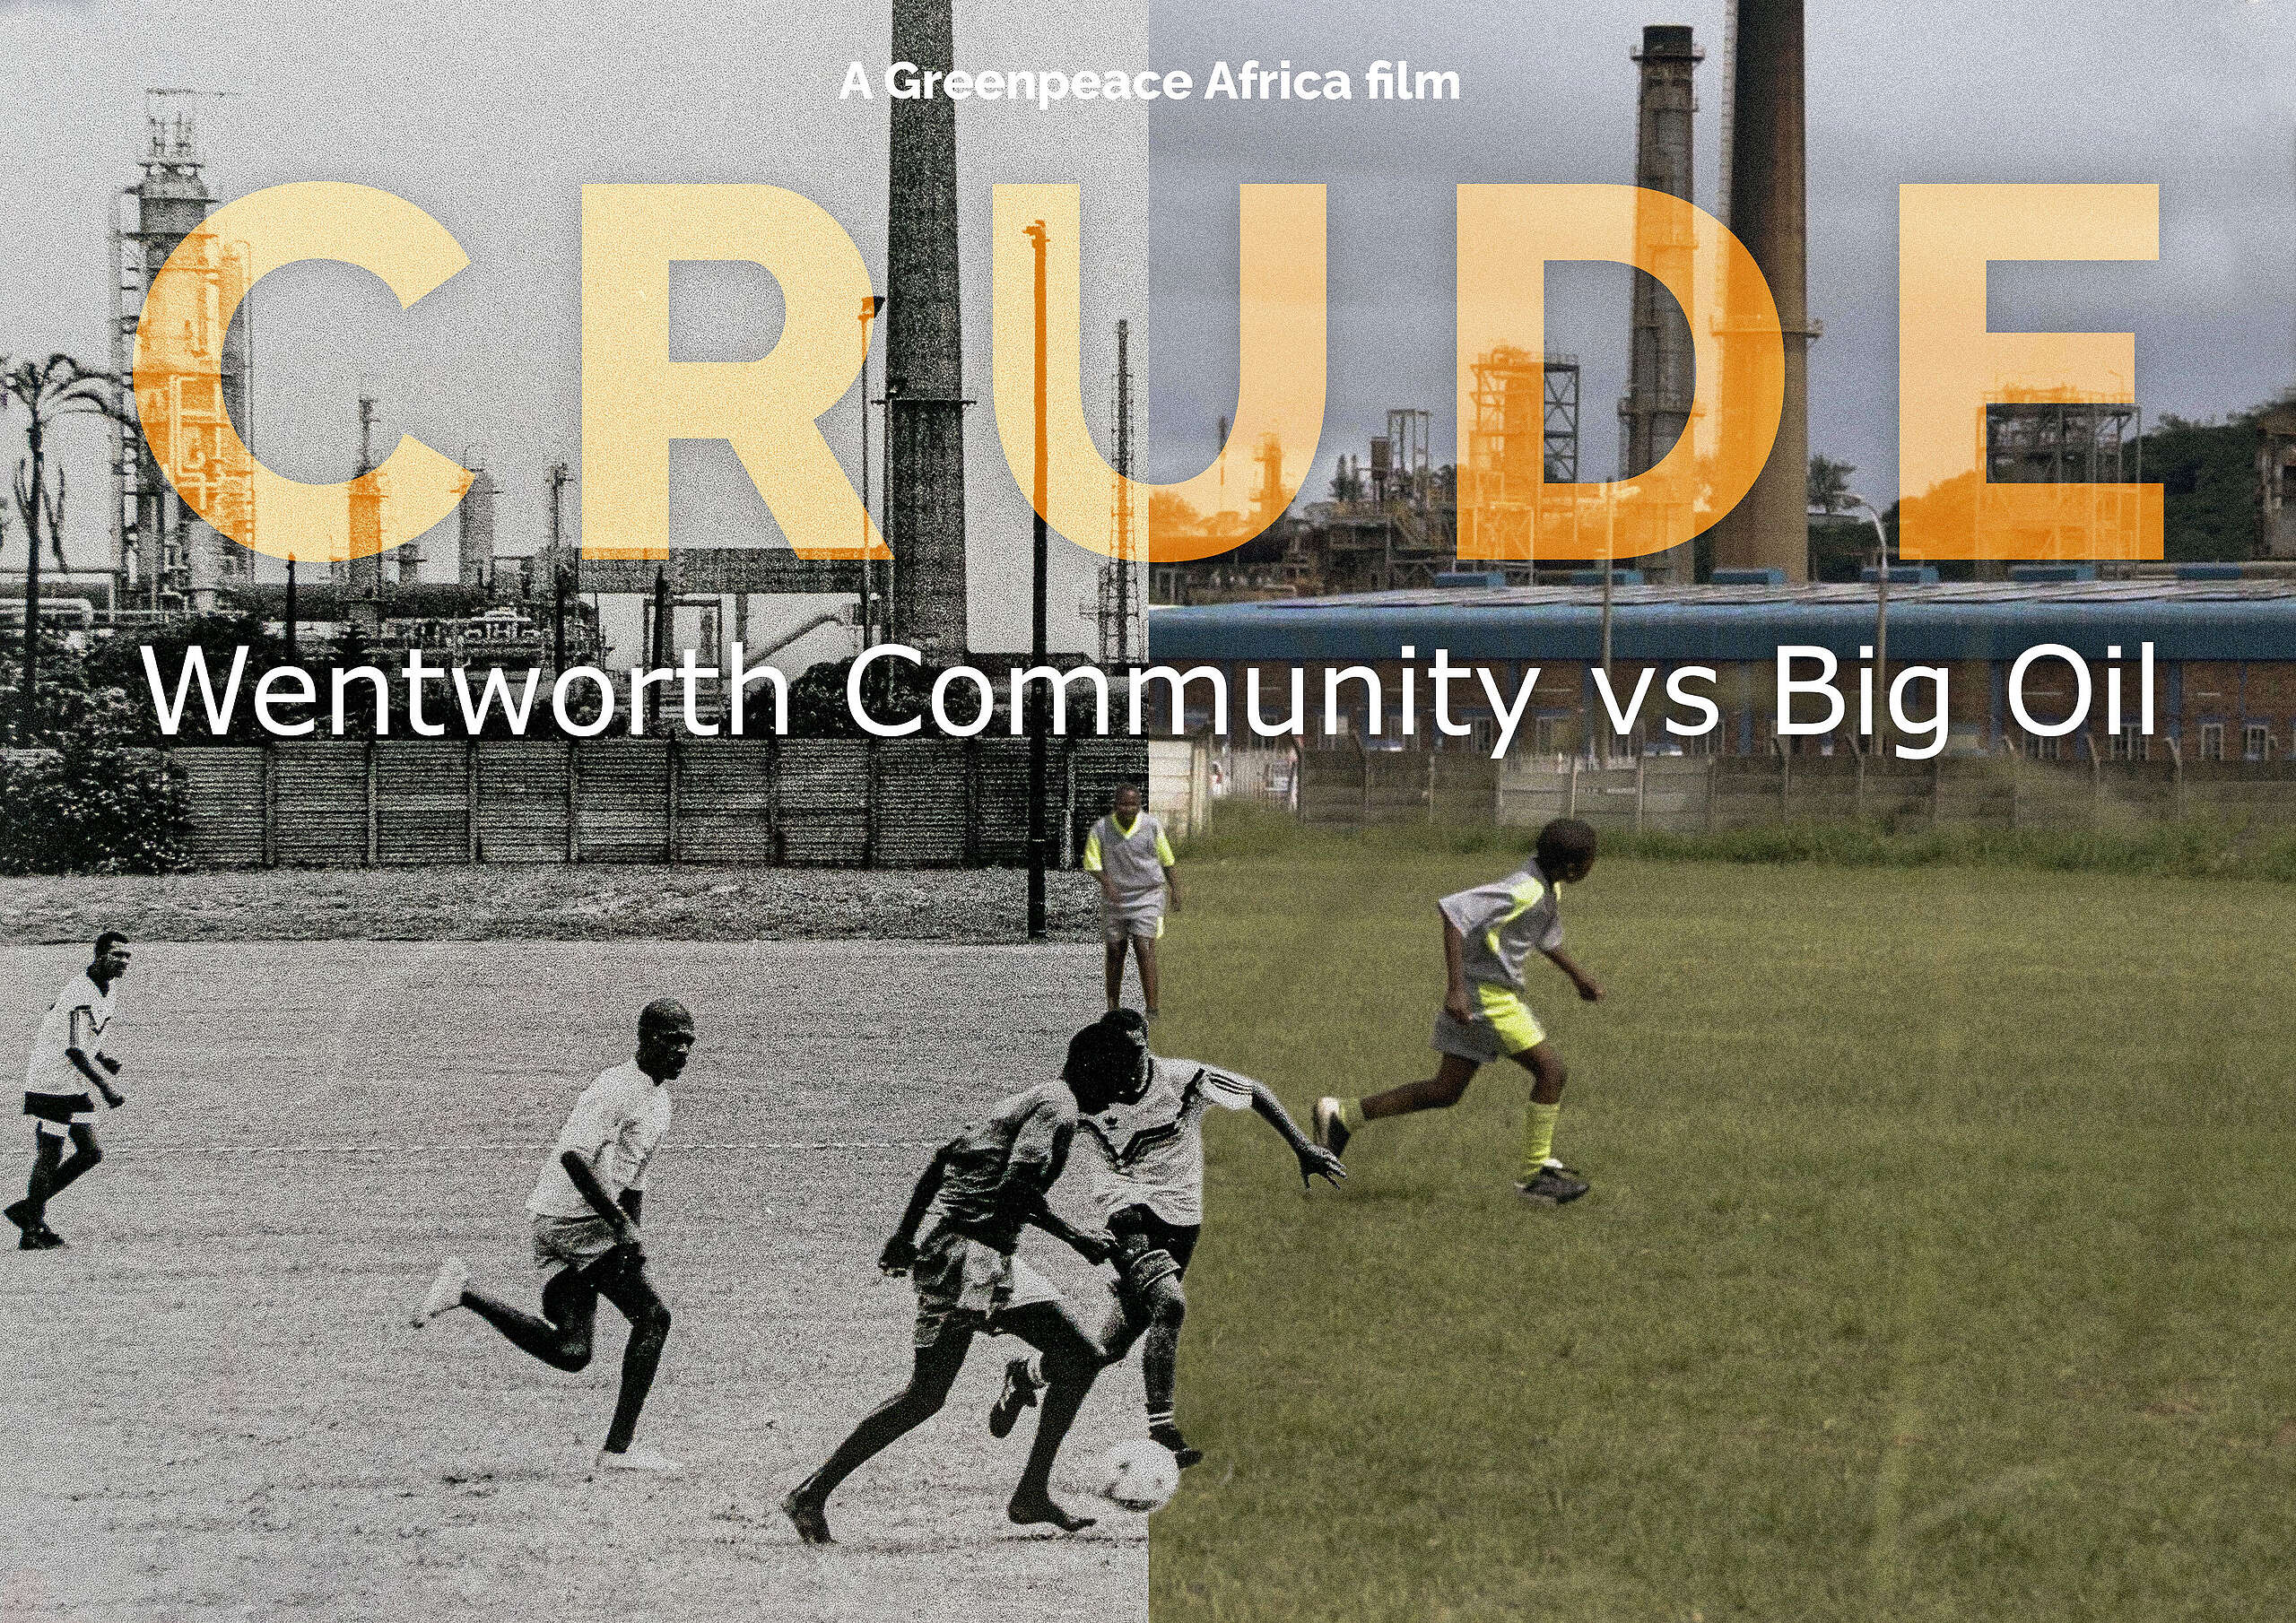 CRUDE documentary poster showing boys playing football with Wentworth Engen oil refinery in the background